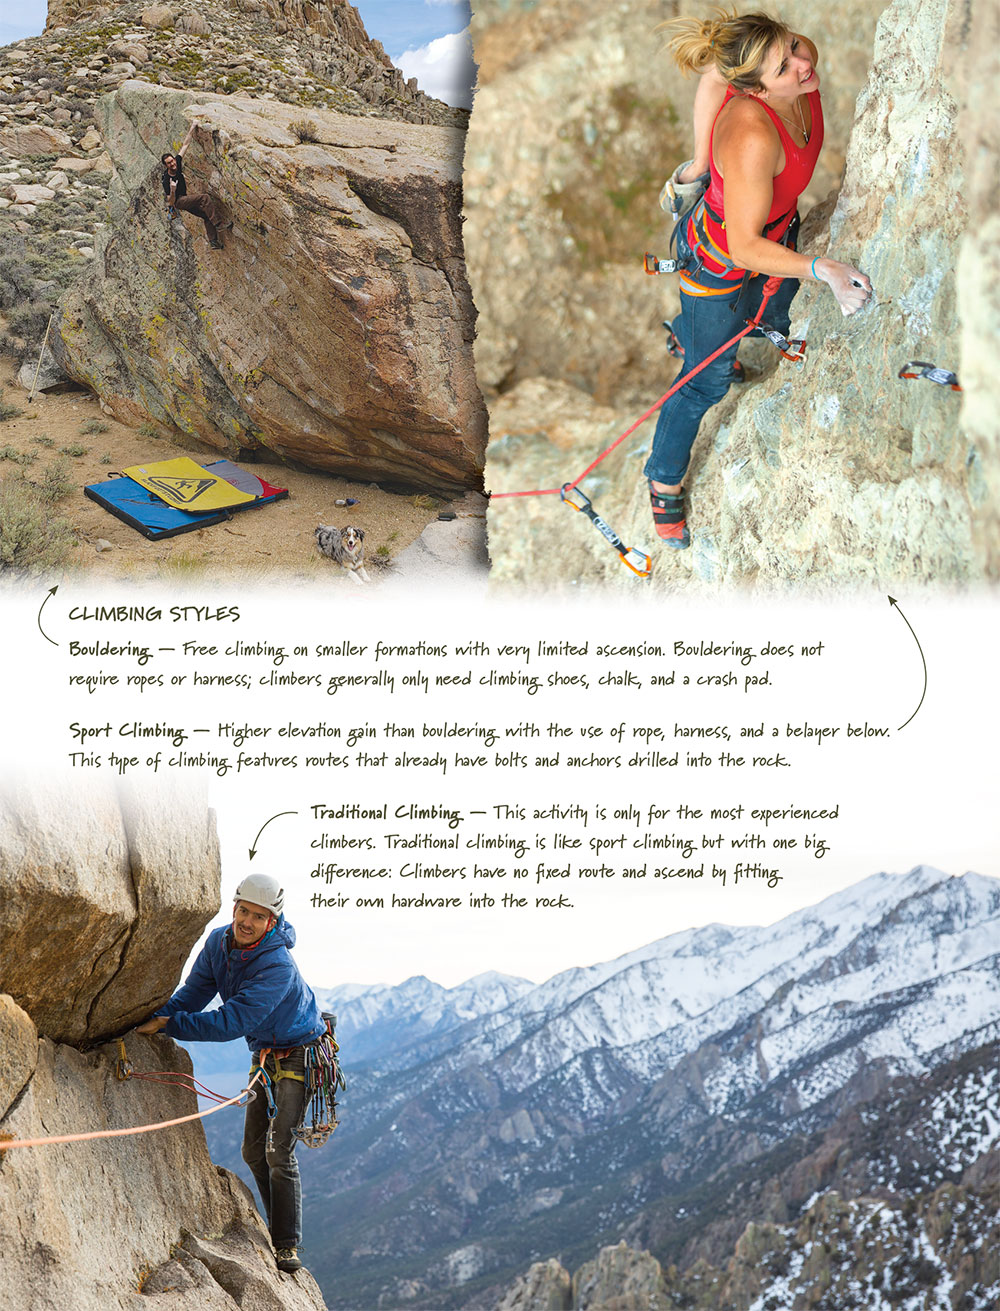 Three photos showing different climbing styles: Bouldering, Sport Climbing, Traditional Climbing